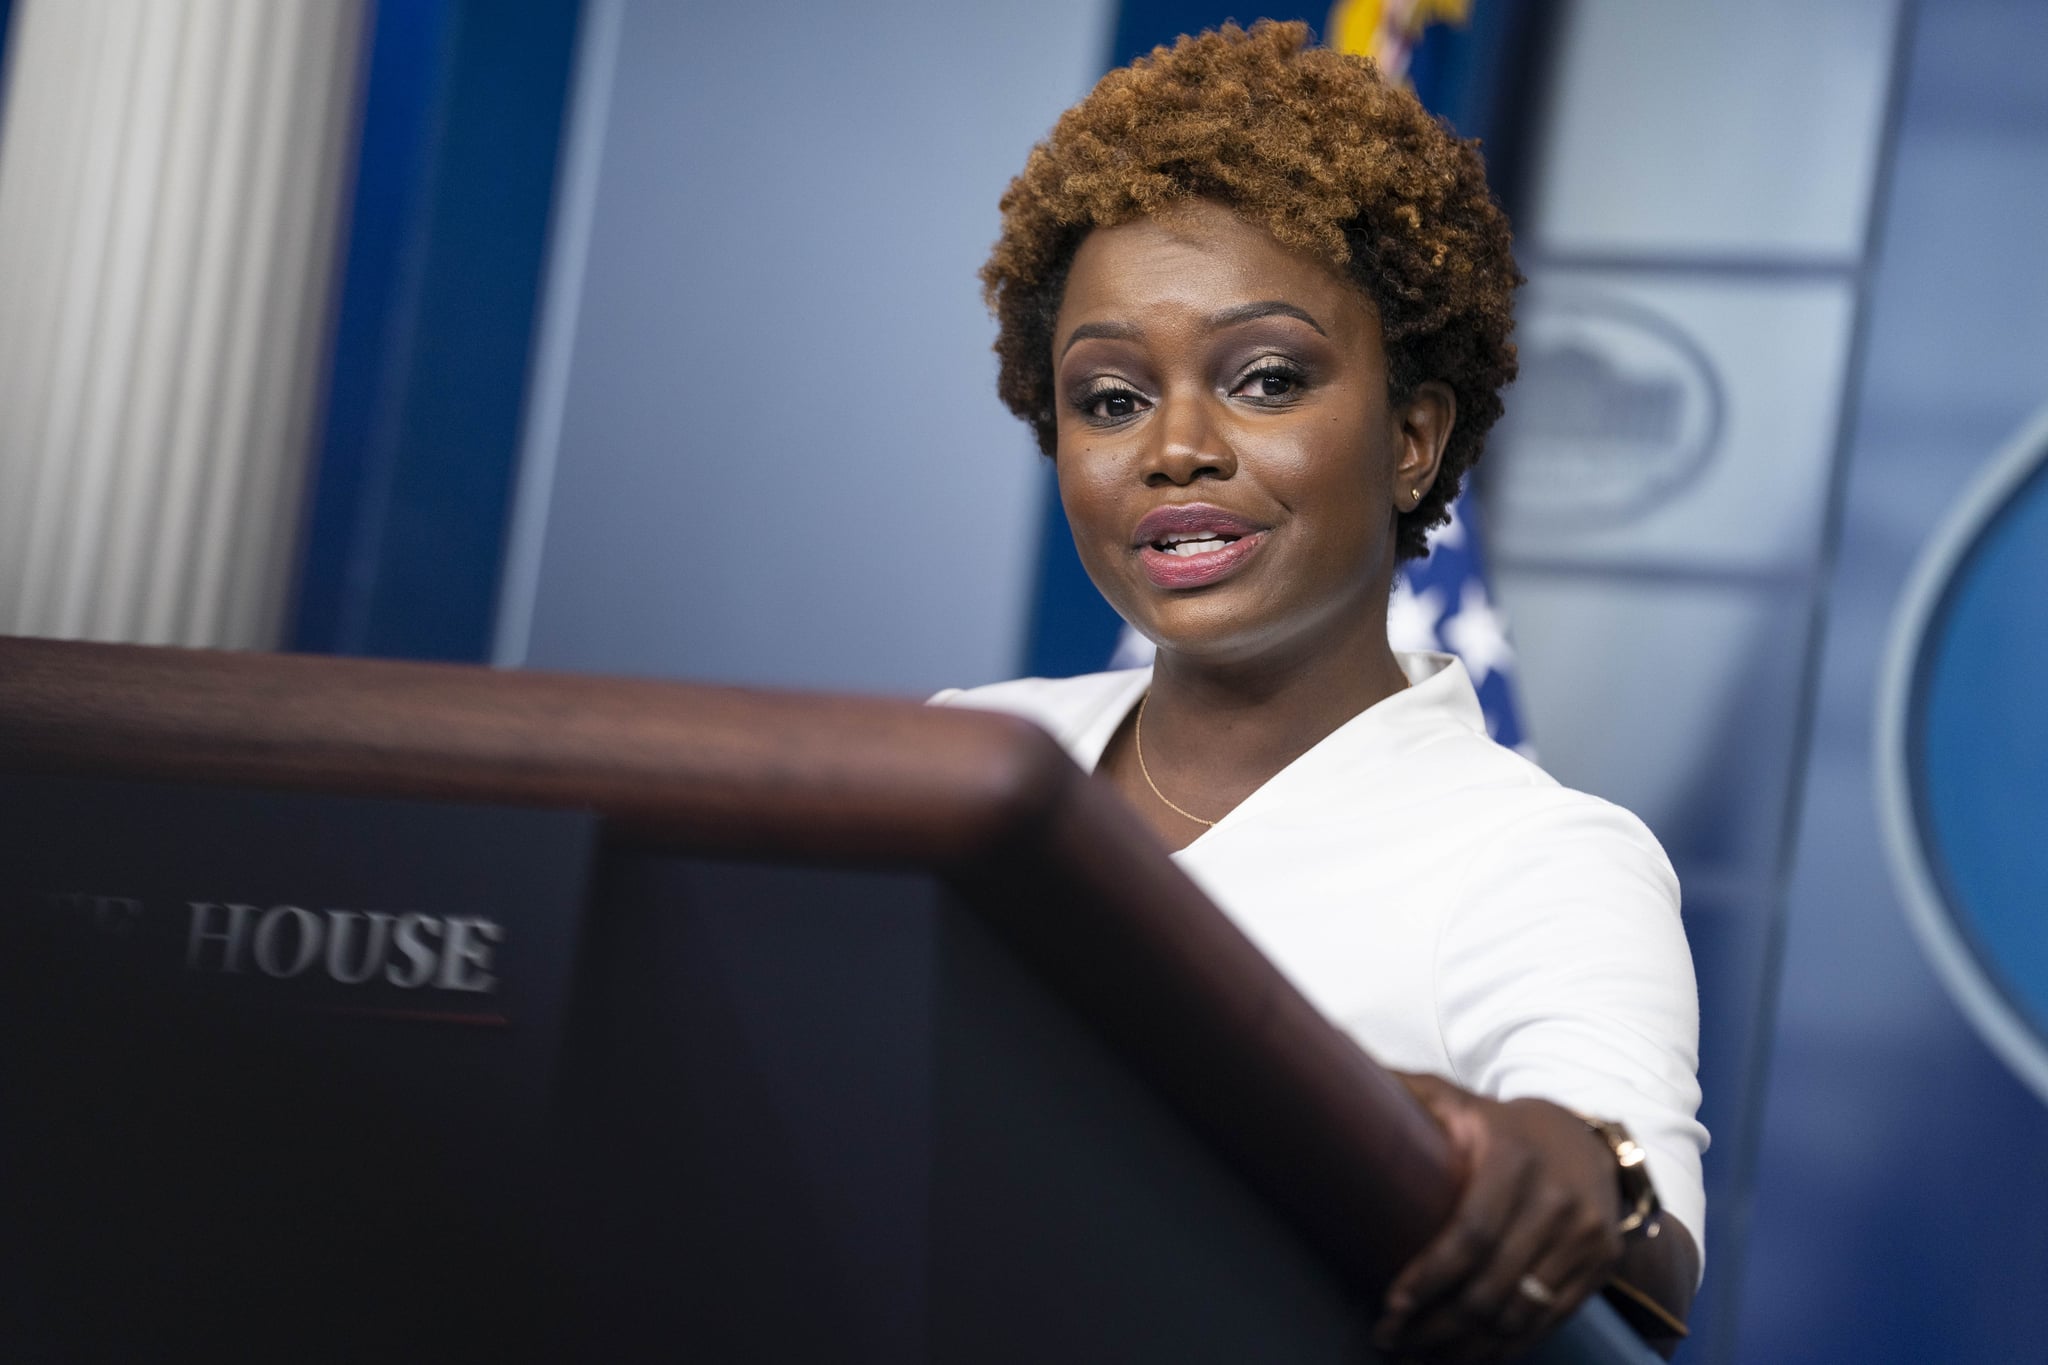 WASHINGTON, DC - NOVEMBER 05: White House Deputy Press Secretary Karine Jean-Pierre speaks during the daily press briefing at the White House on November 5, 2021 in Washington, DC. Jean-Pierre spoke to reporters about the Build Back Better agenda and the October jobs reports. (Photo by Sarah Silbiger/Getty Images)